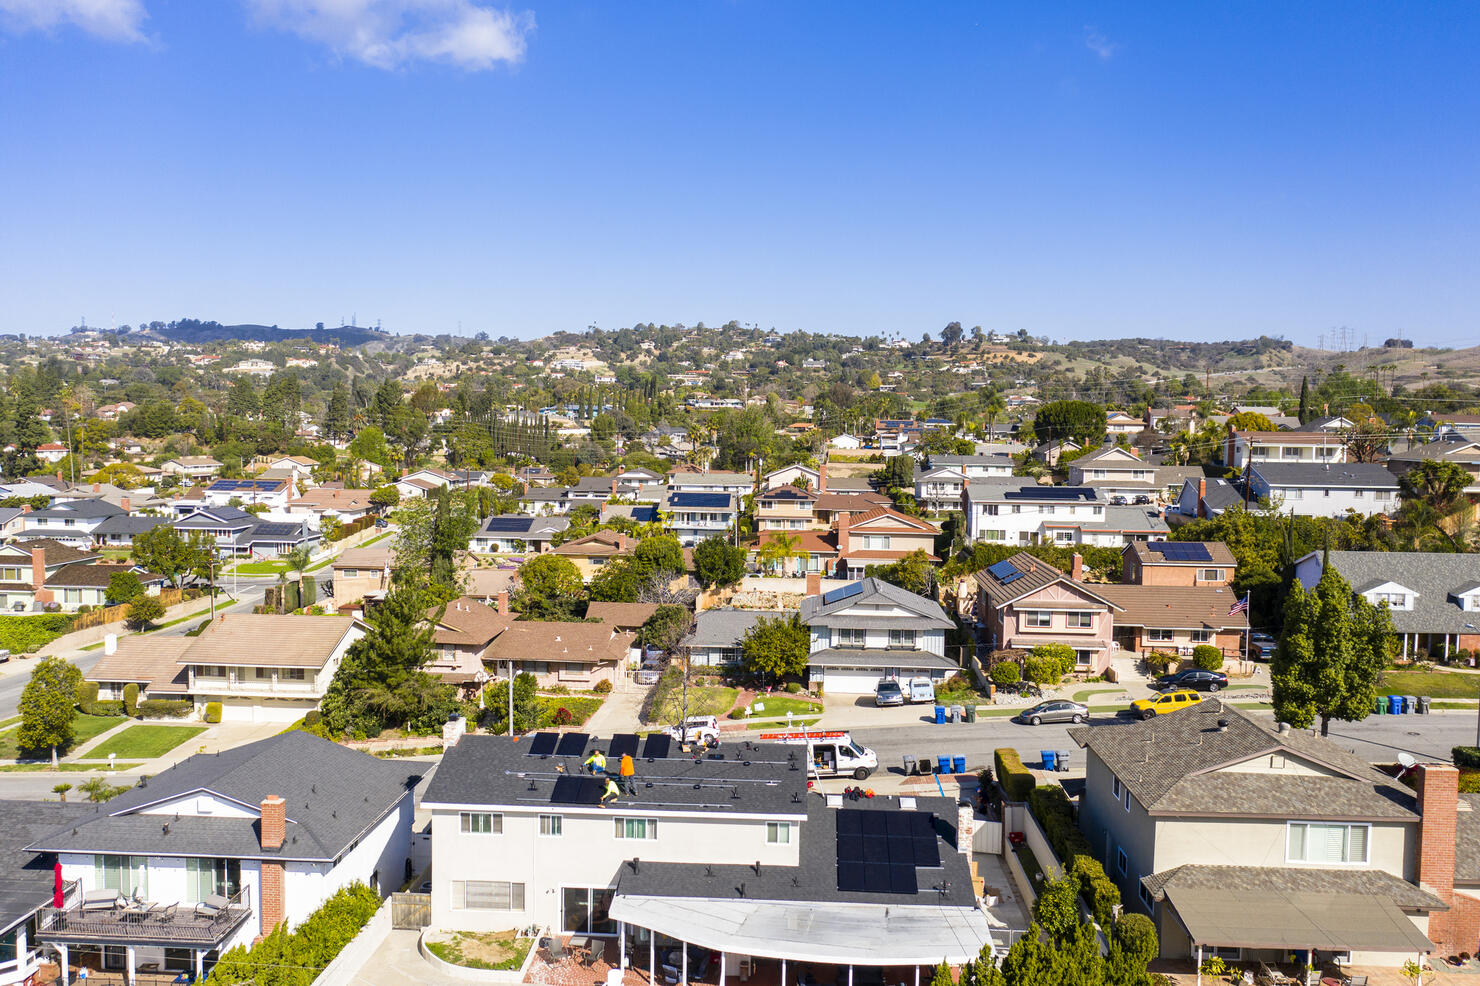 Wide View of Team of Workers Installing Solar Panels on Residential Rooftop in California